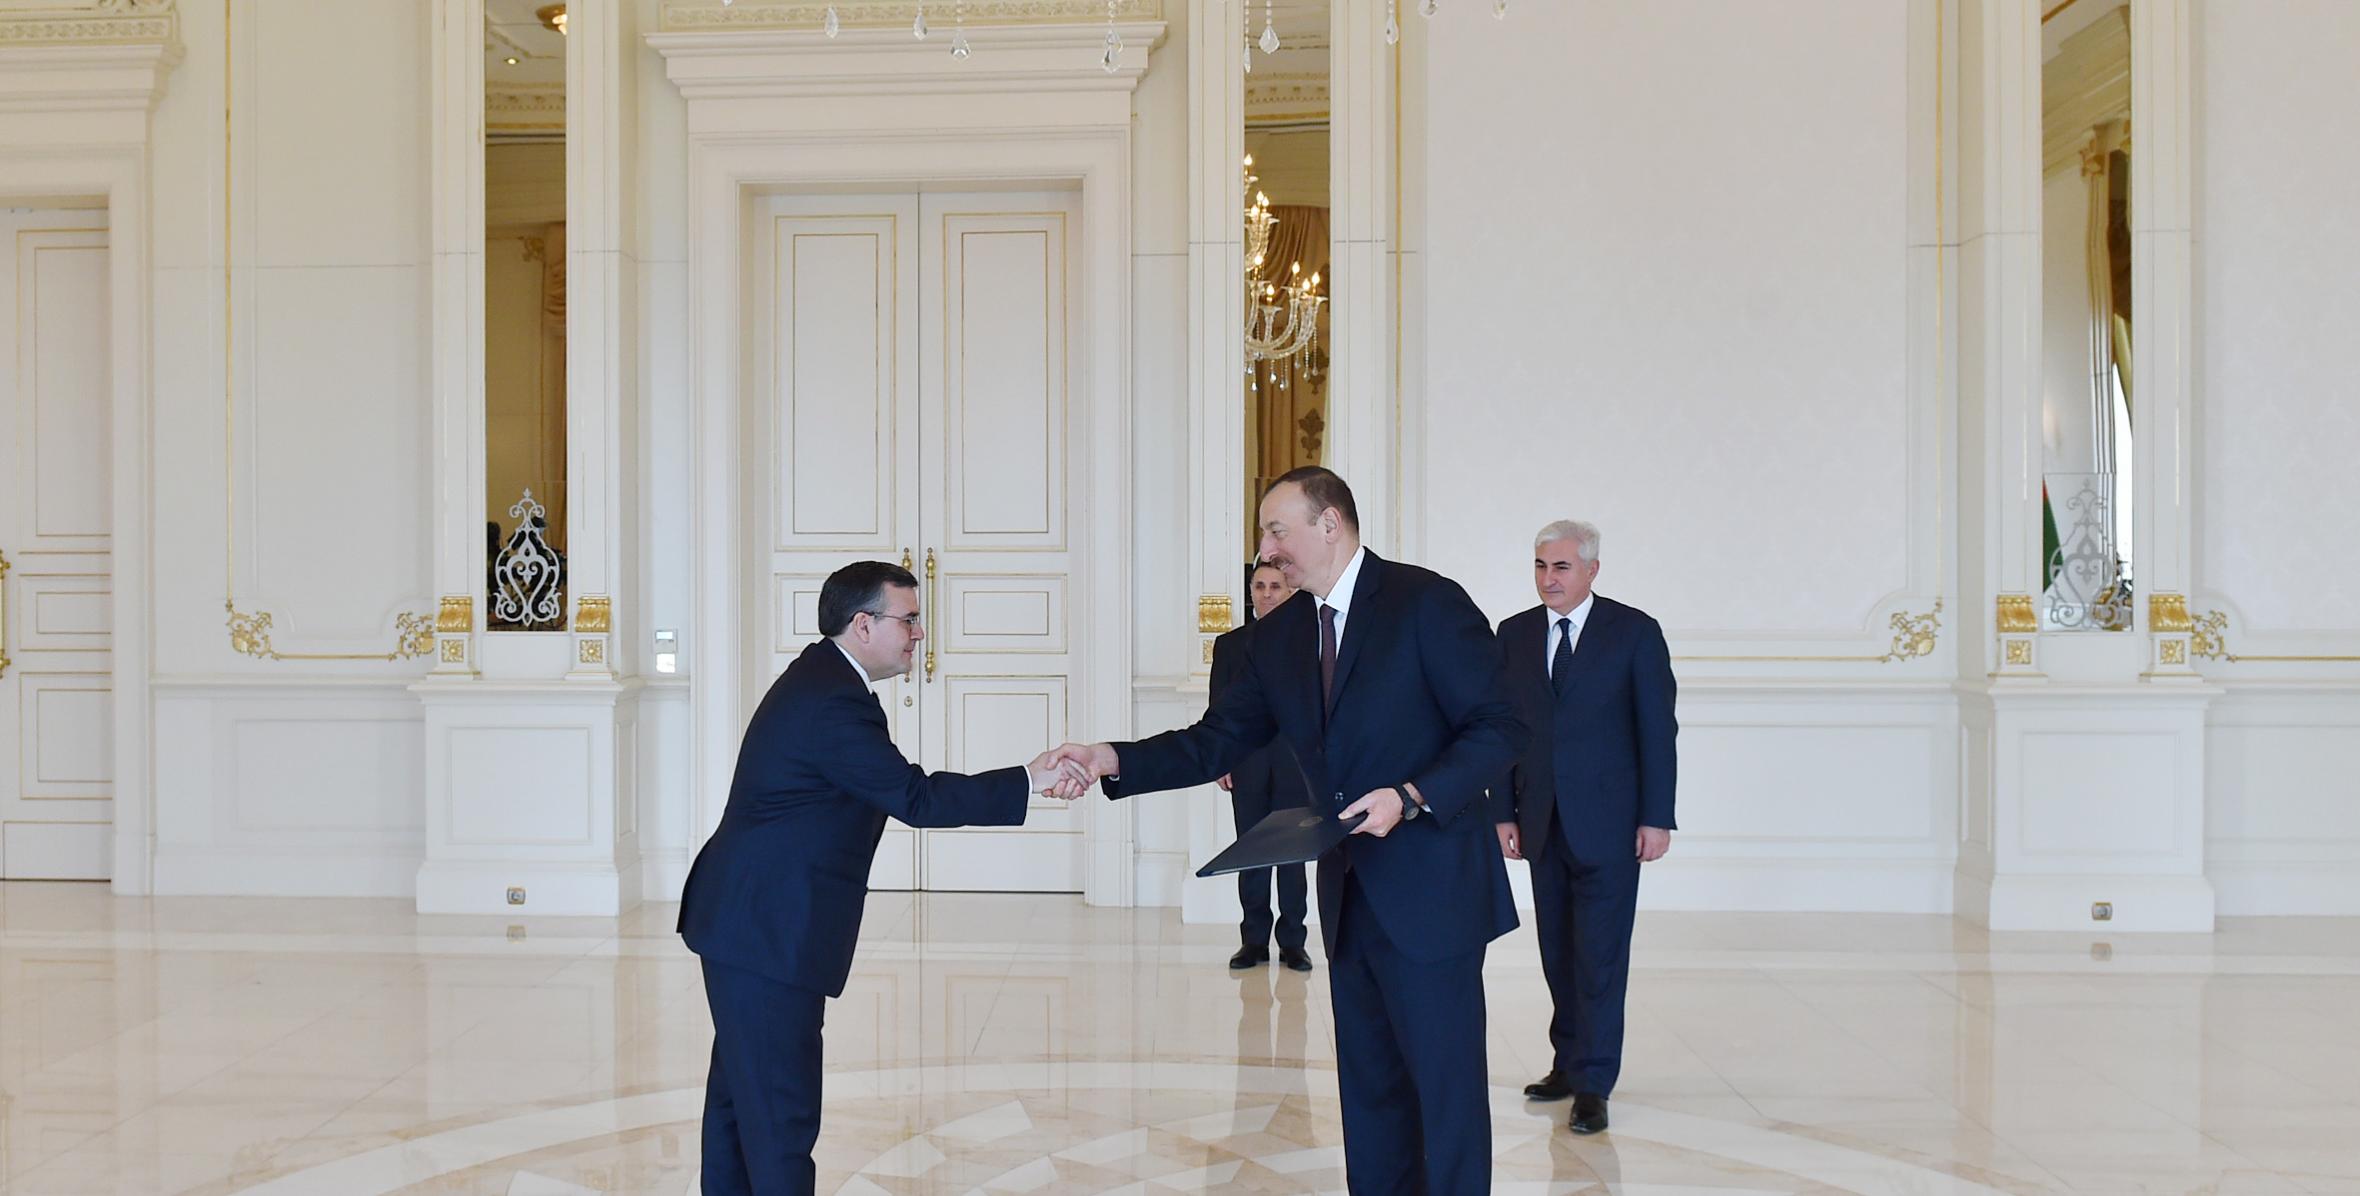 Ilham Aliyev received the credentials of the newly-appointed Ambassador of the Eastern Republic of Uruguay